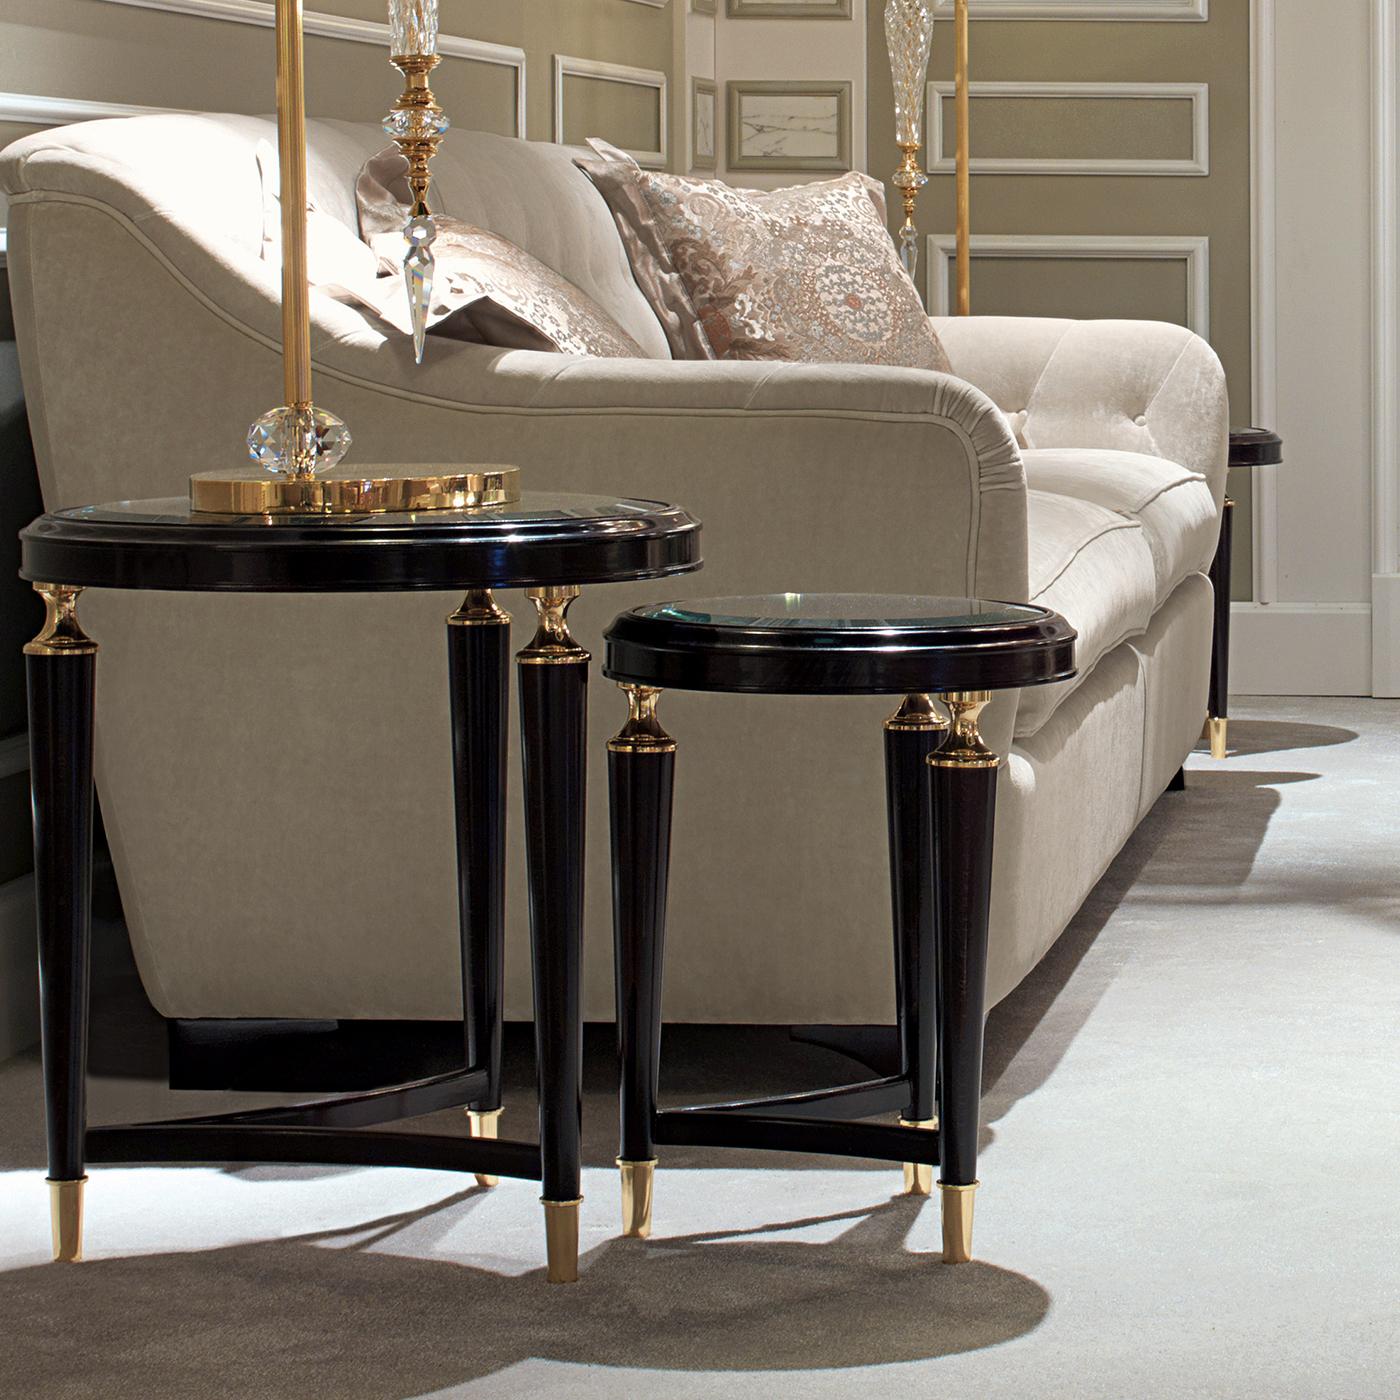 This charming set of two nesting side tables is a precious and versatile addition to a Classic decor. Either together, as pair, or displayed separately, this duo will add elegance and a retro allure to a living room. The structure of each piece is